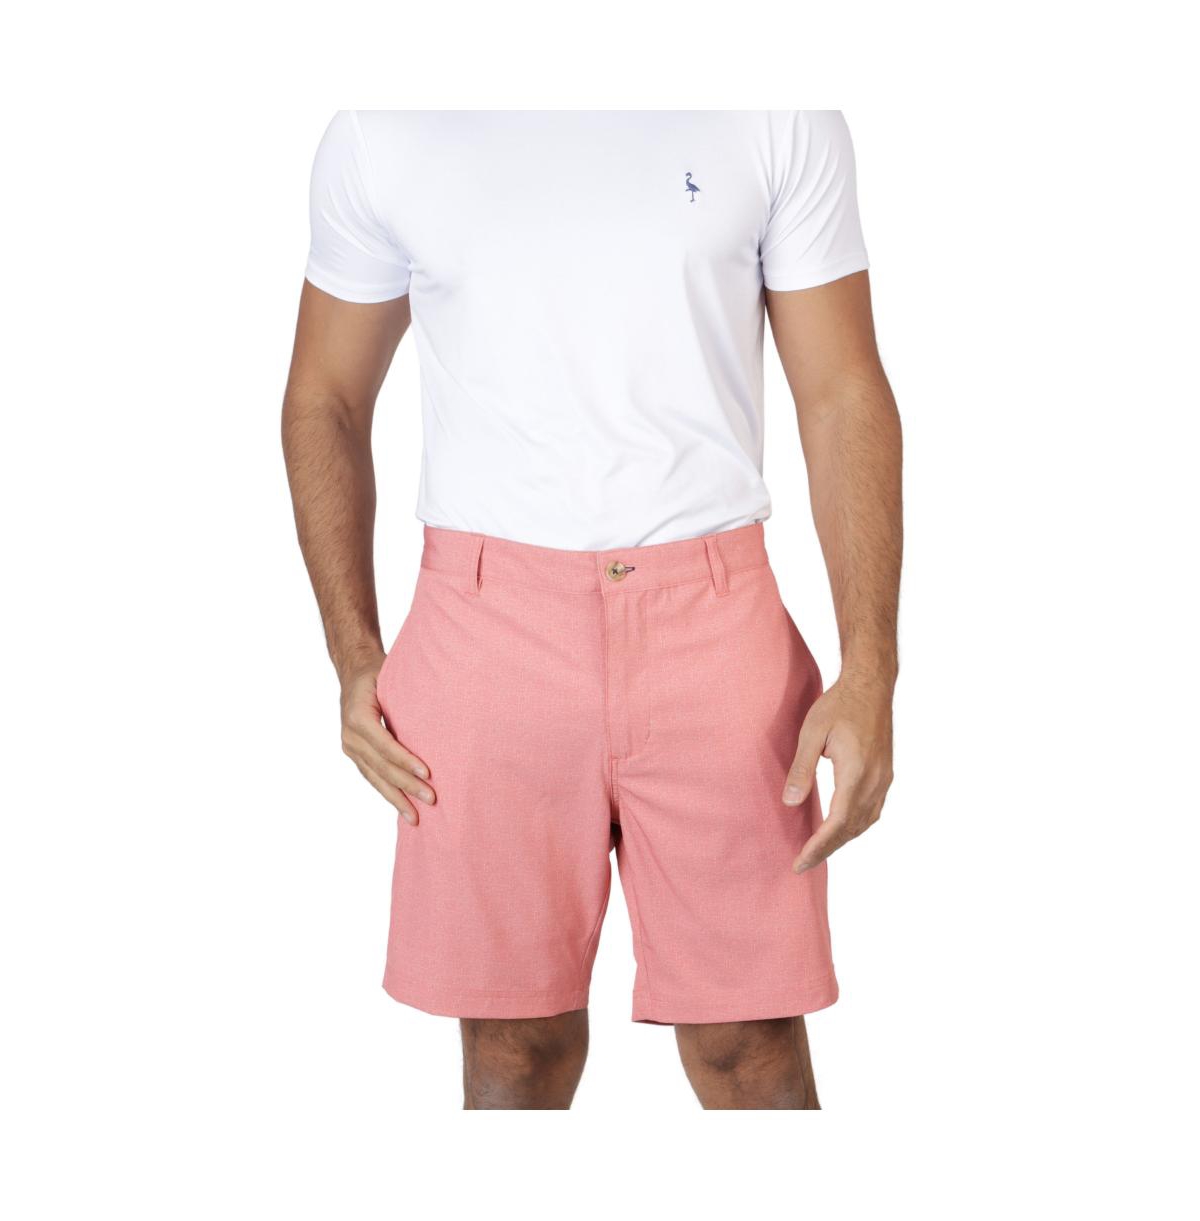 Men's On The Fly Melange Shorts with Contrast Interior - Navy